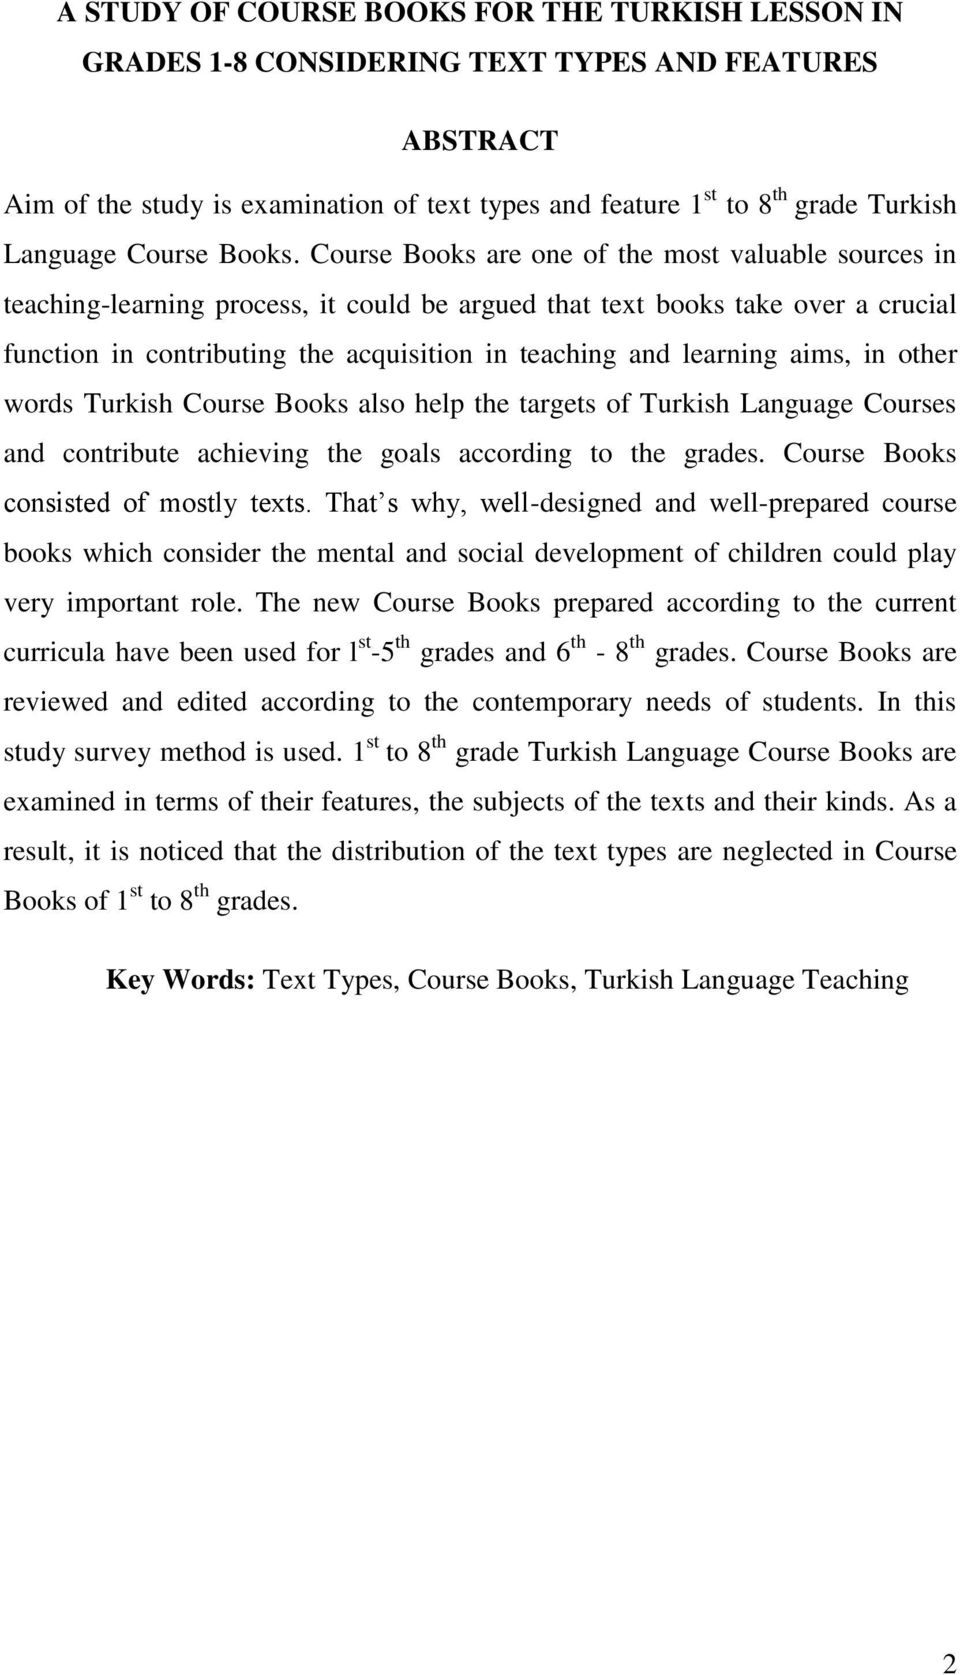 Course Books are one of the most valuable sources in teaching-learning process, it could be argued that text books take over a crucial function in contributing the acquisition in teaching and